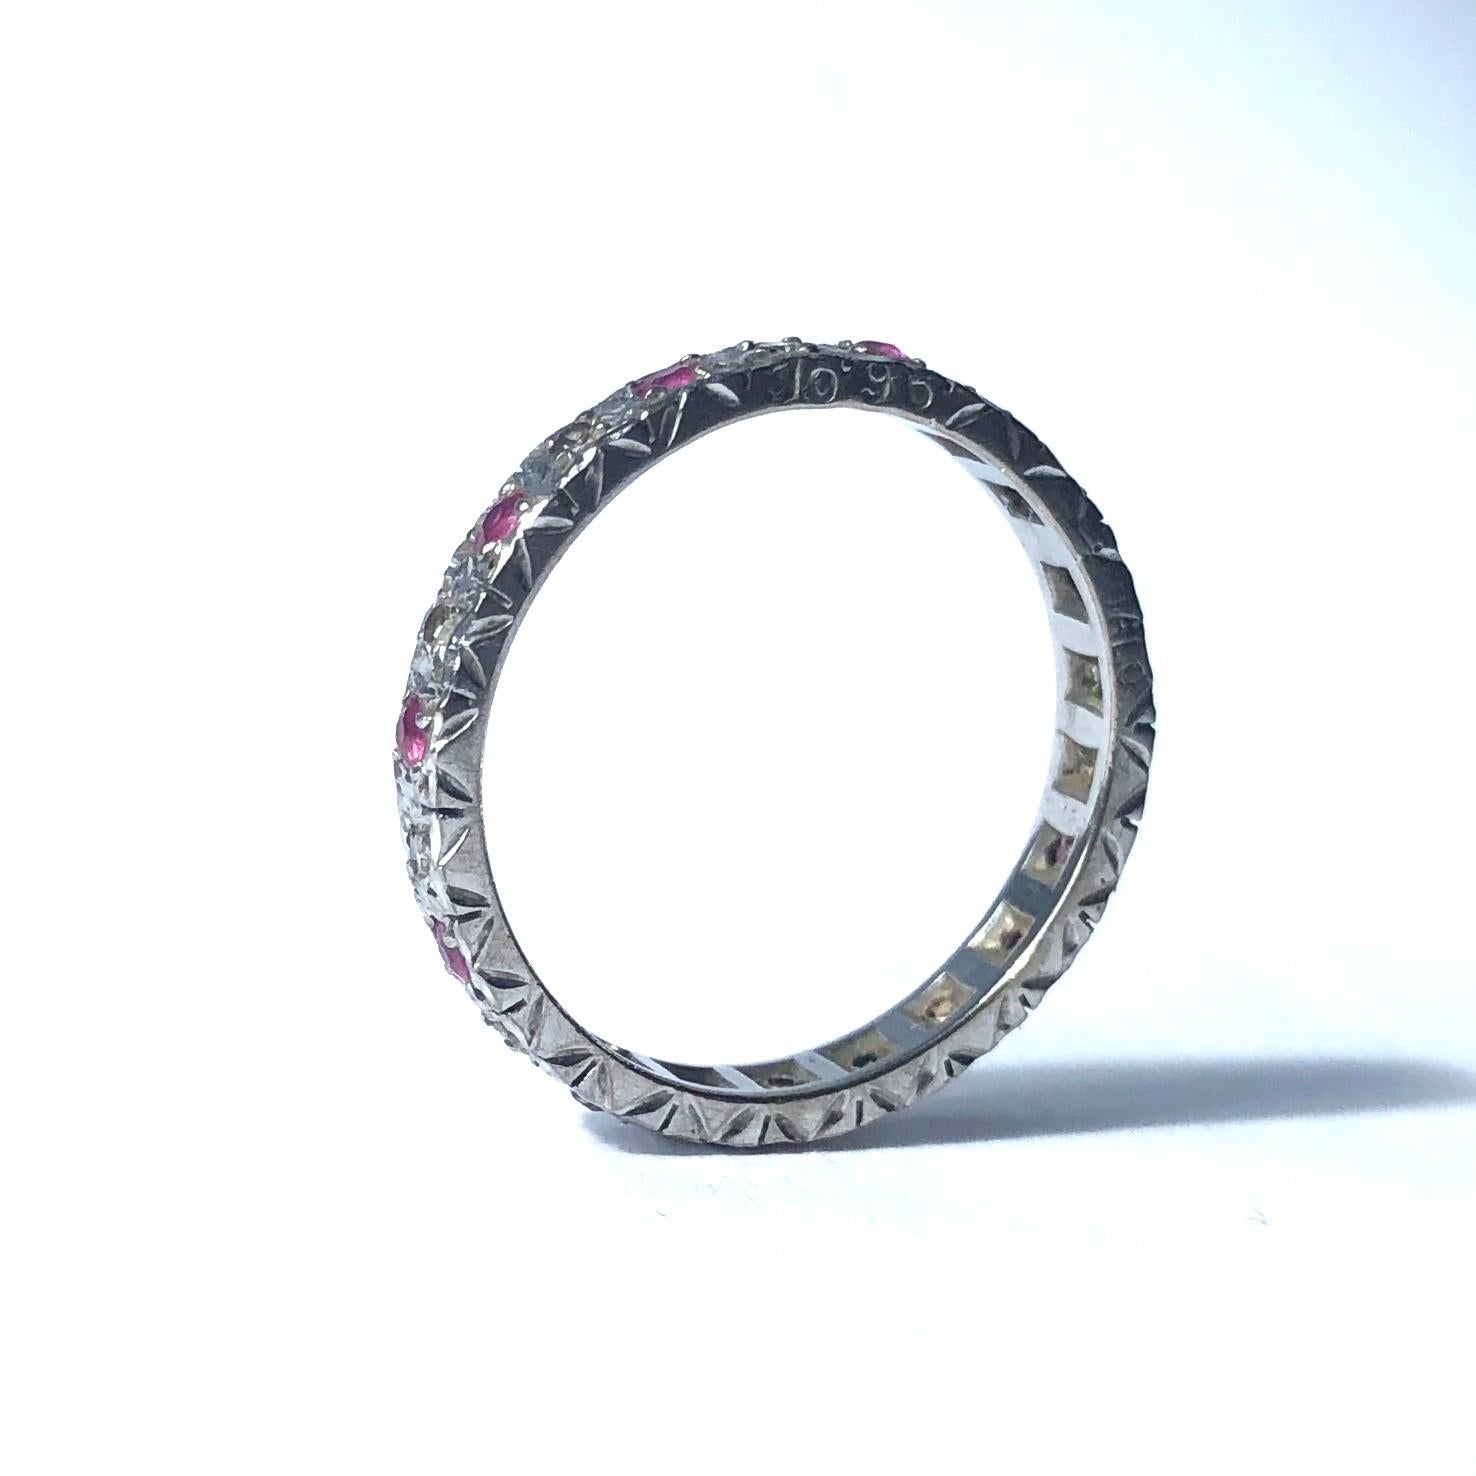 Set within this 18ct white gold band are 5pt rubies and the diamonds which sit in between every gorgeous pink ruby measure 3pts each. The balance of the pink and clear bright sparkle is beautiful. 

Ring Size: R or 8 1/2 
Band Width: 3mm

Weight: